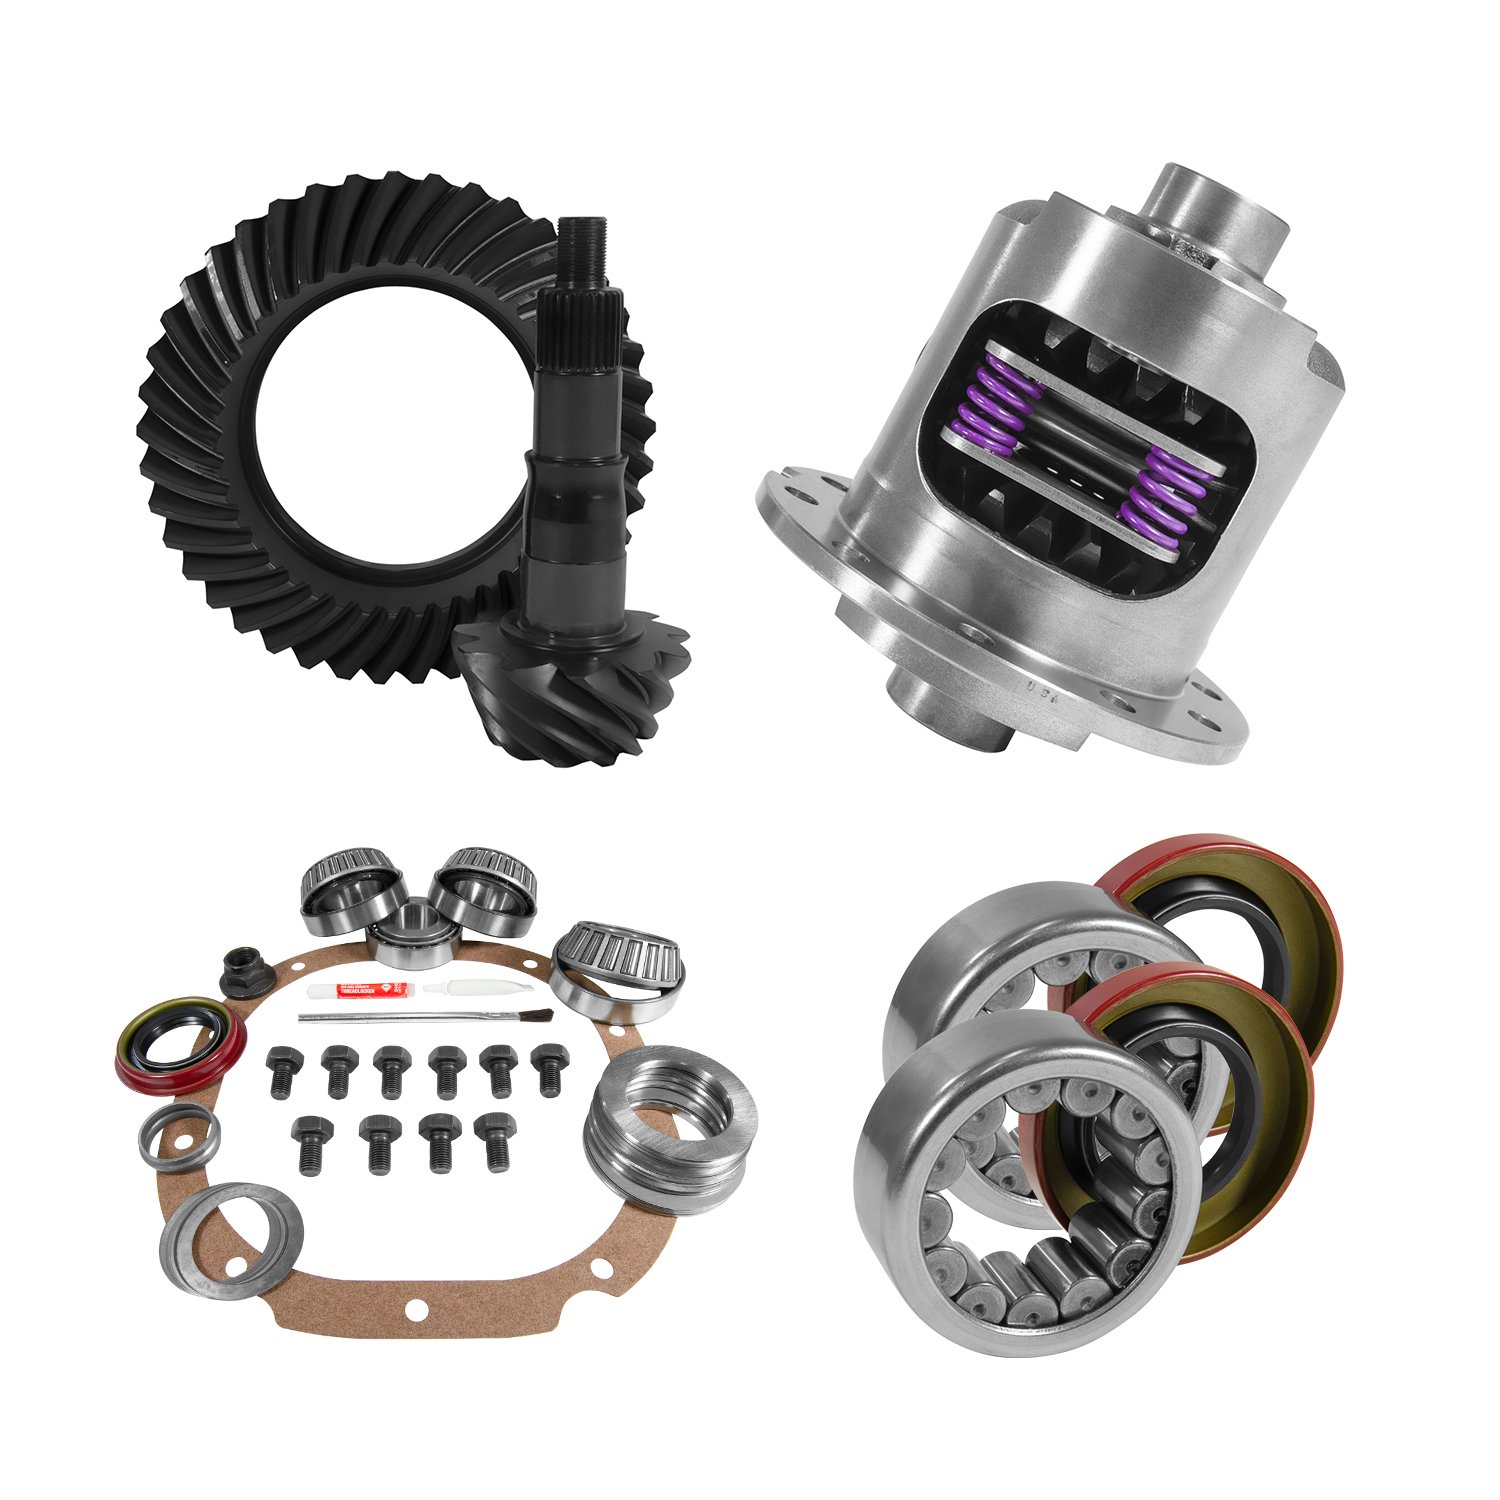 USA Standard 10761 8.8 in. Ford 3.55 Rear Ring & Pinion Install Kit, 31Spl Posi, 2.99 in. Axle Bearings